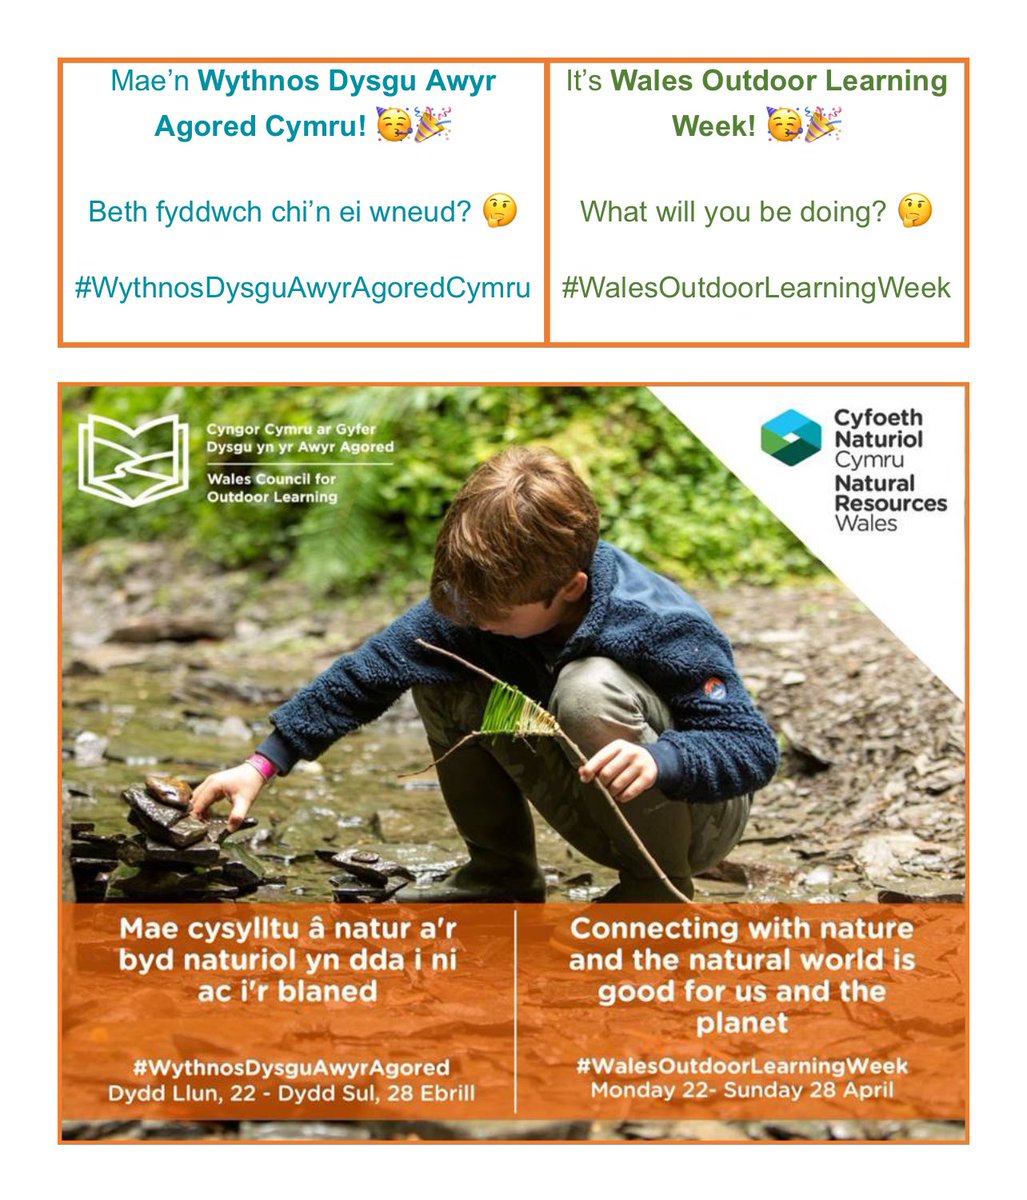 So what are you doing this week outdoors? @networkEdPLD @Springwood_Prm @GaerPrimary @MaesglasPrimary @GlyncoedP @Holtonprimary #walesoutdoorlearningweek